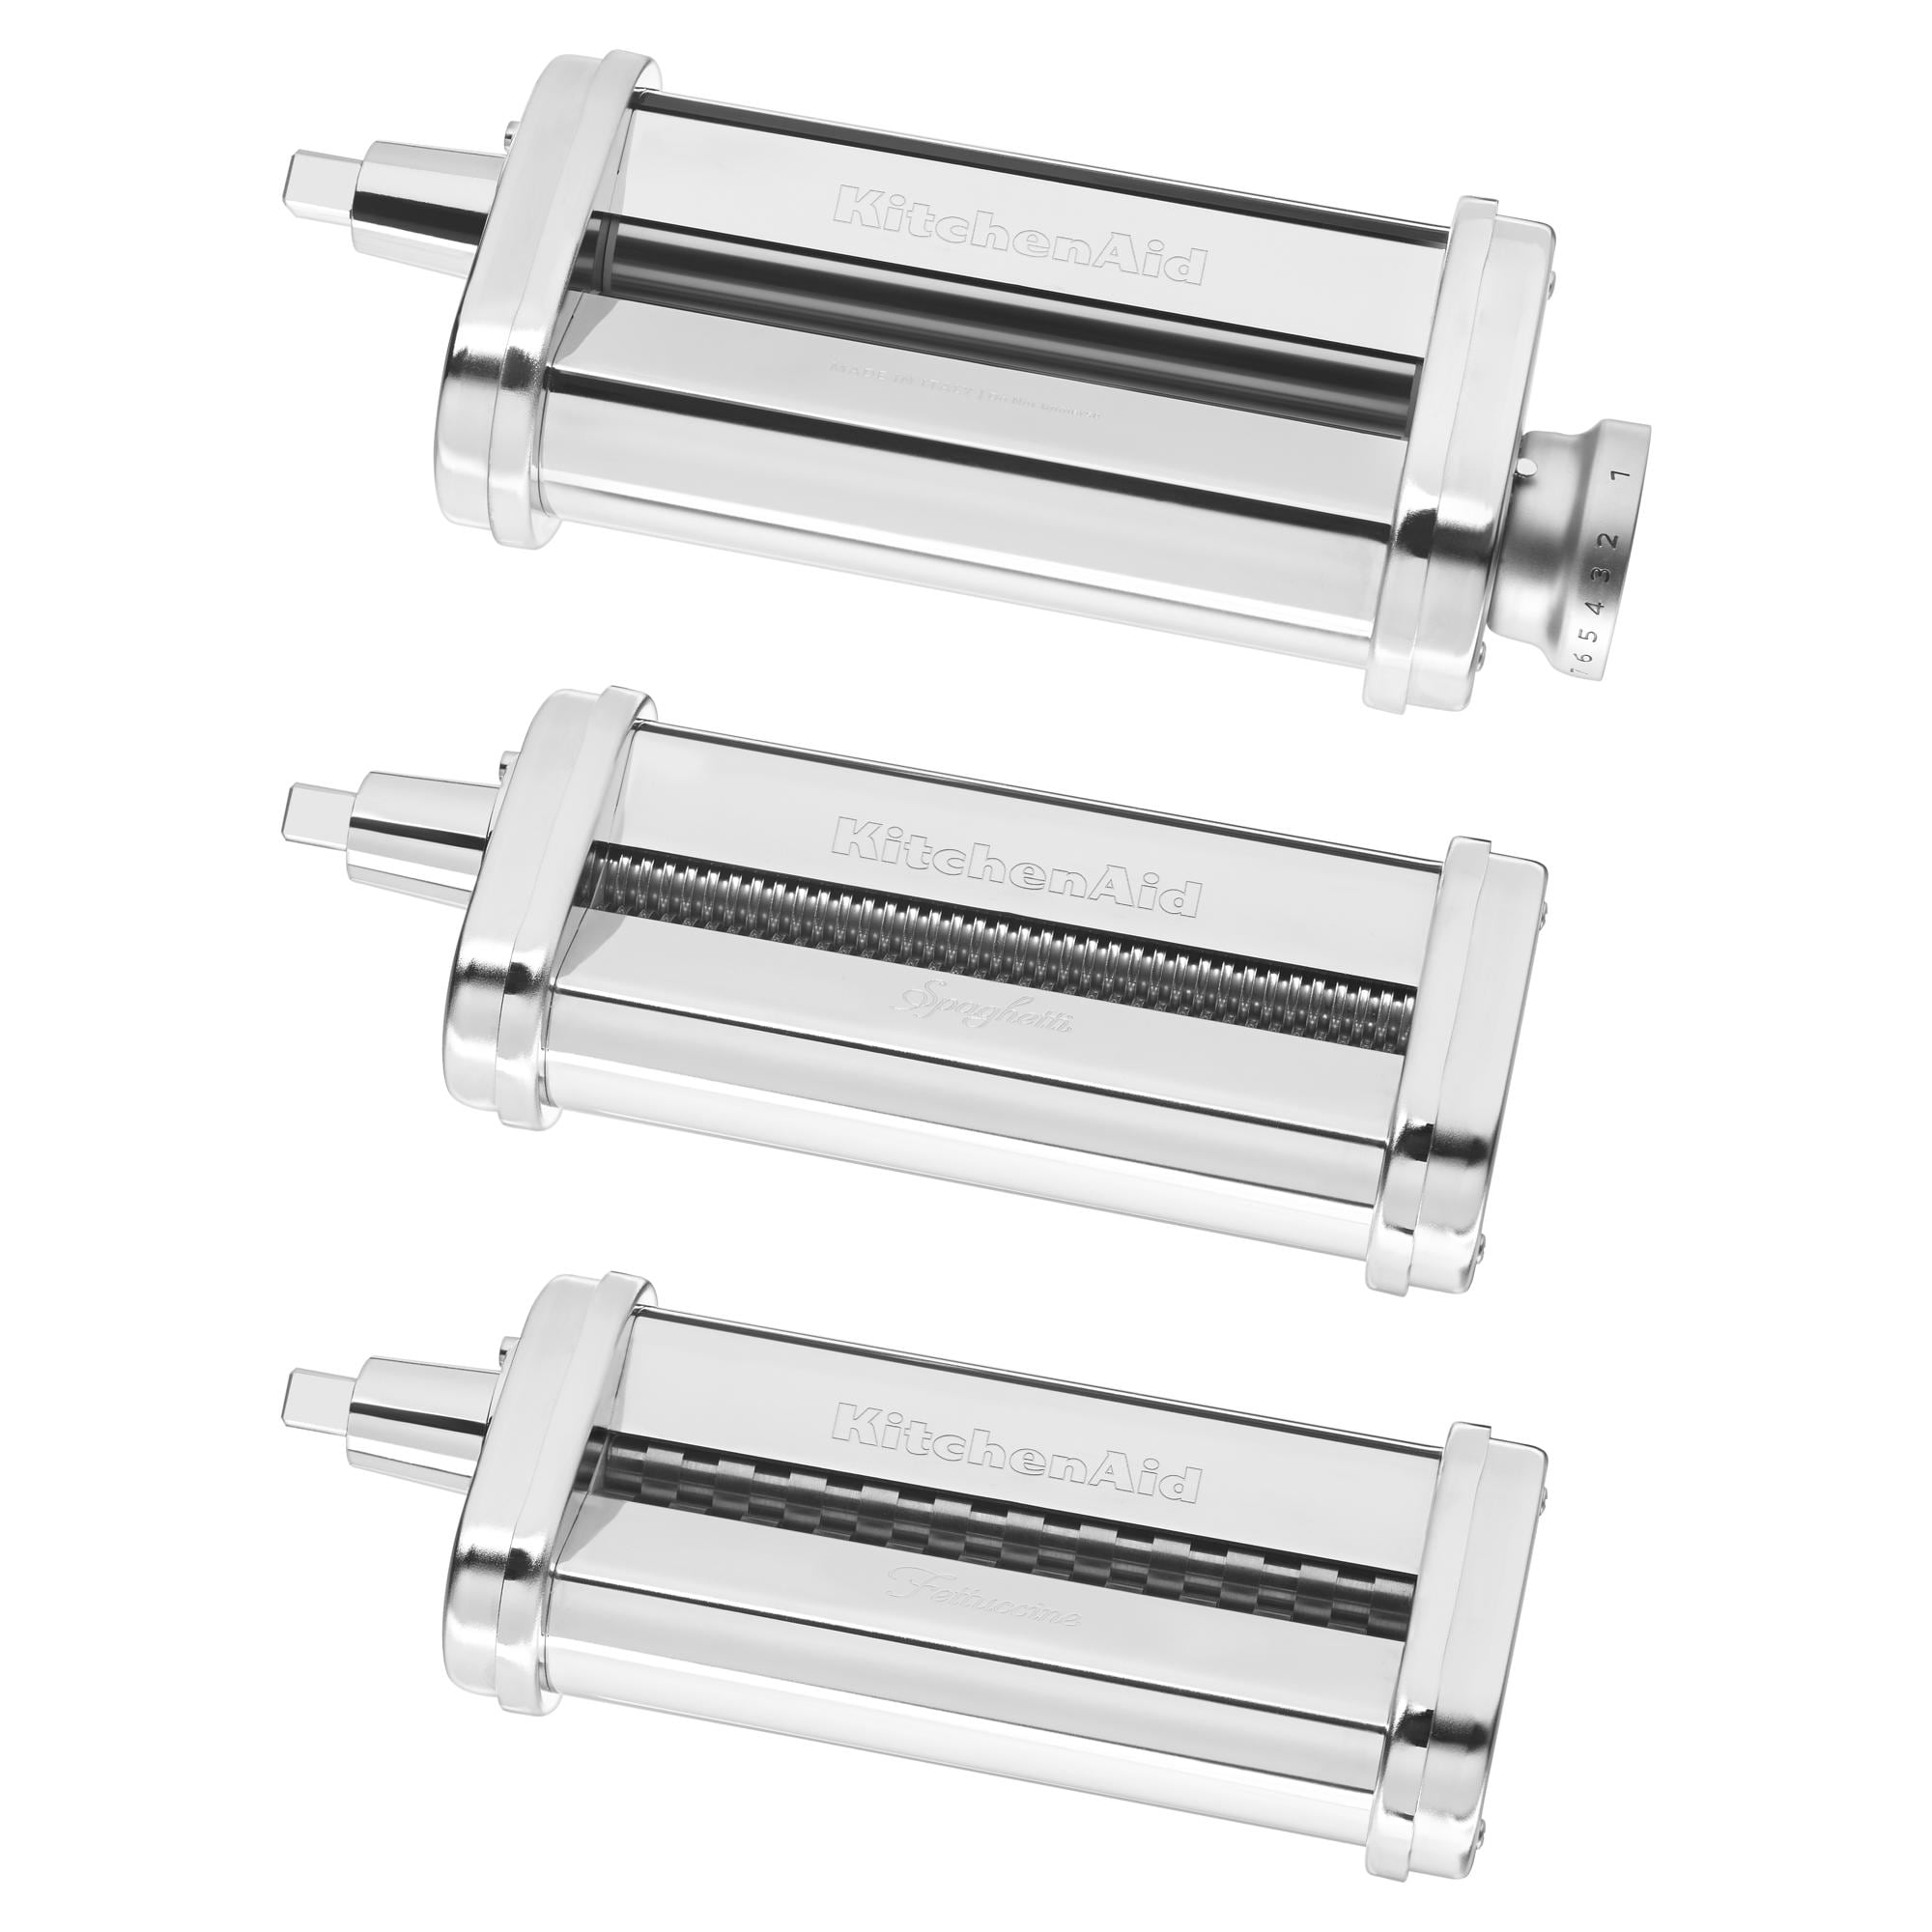 VENTRAY 3-Piece Pasta Roller & Cutter Set, Stainless Steel Pasta